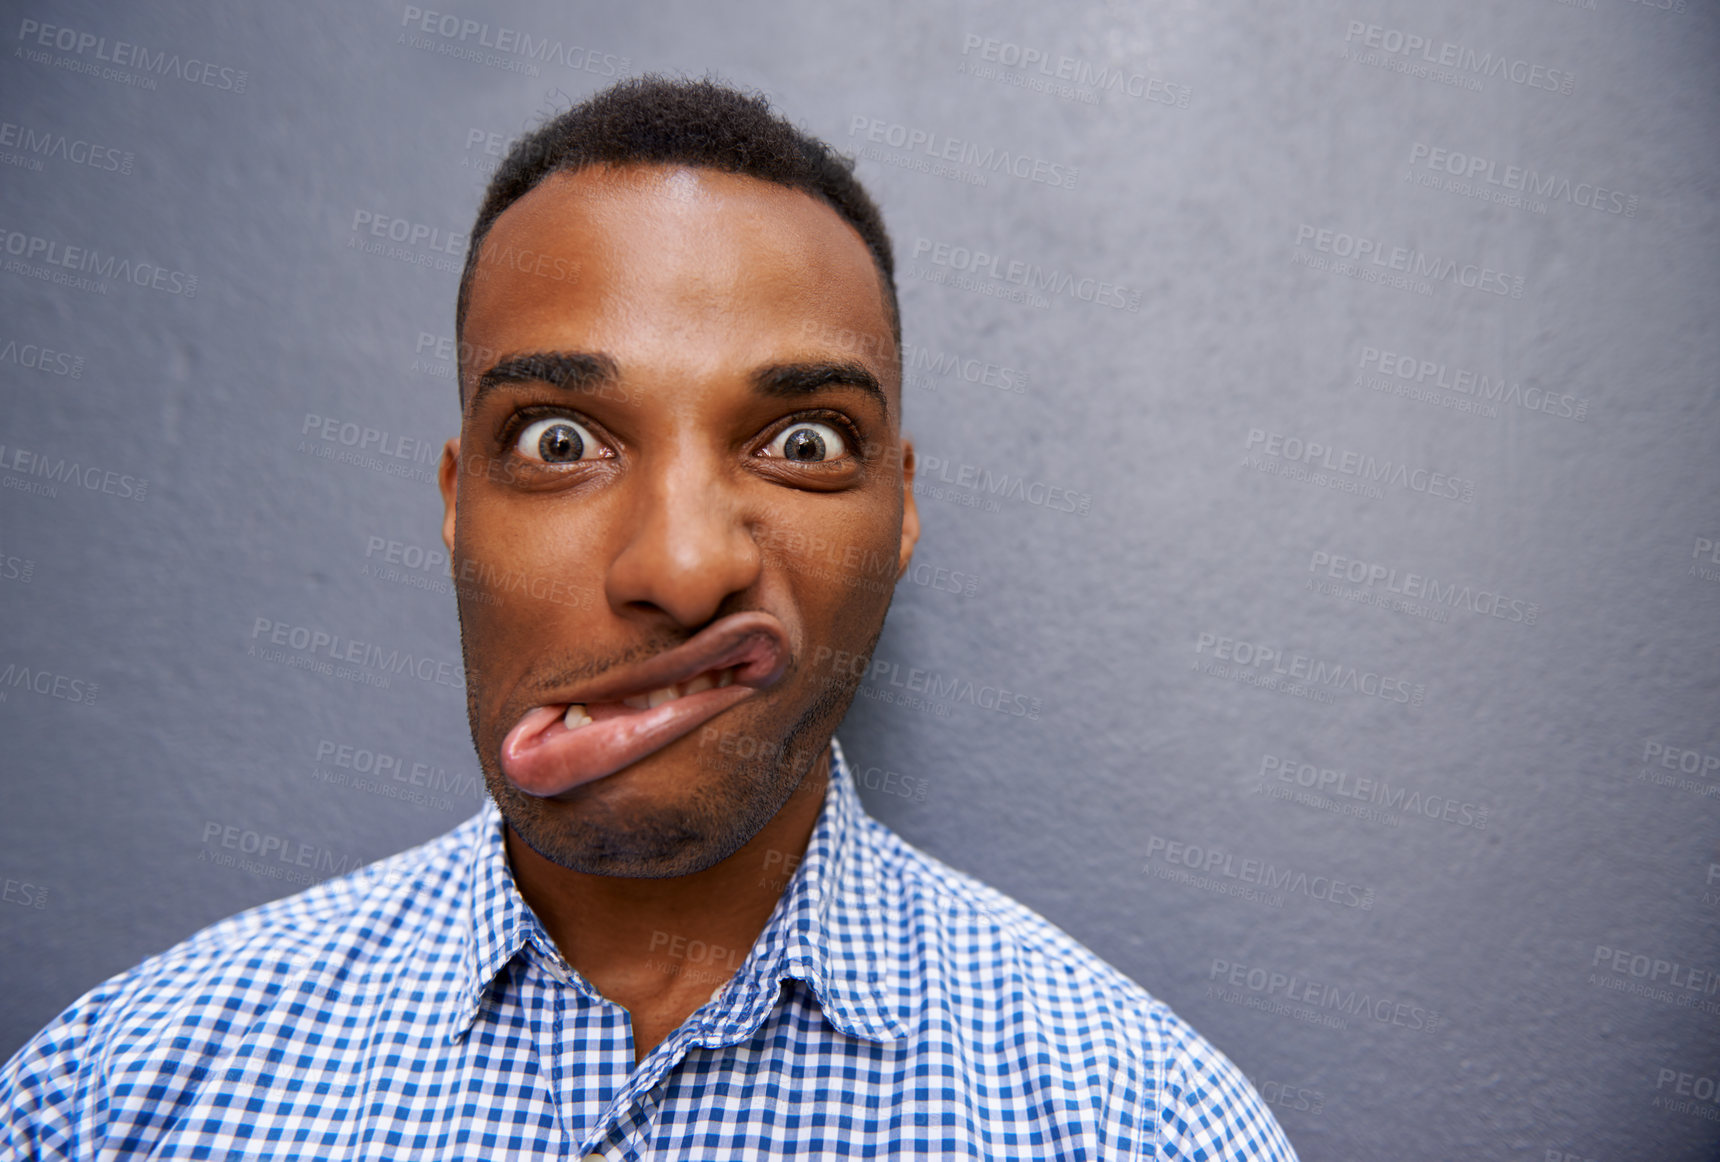 Buy stock photo Goofy, funny and portrait of black man by wall for comic, playful or comedy joke expression. Silly, crazy and face of confident young African male person by gray background with mockup space.